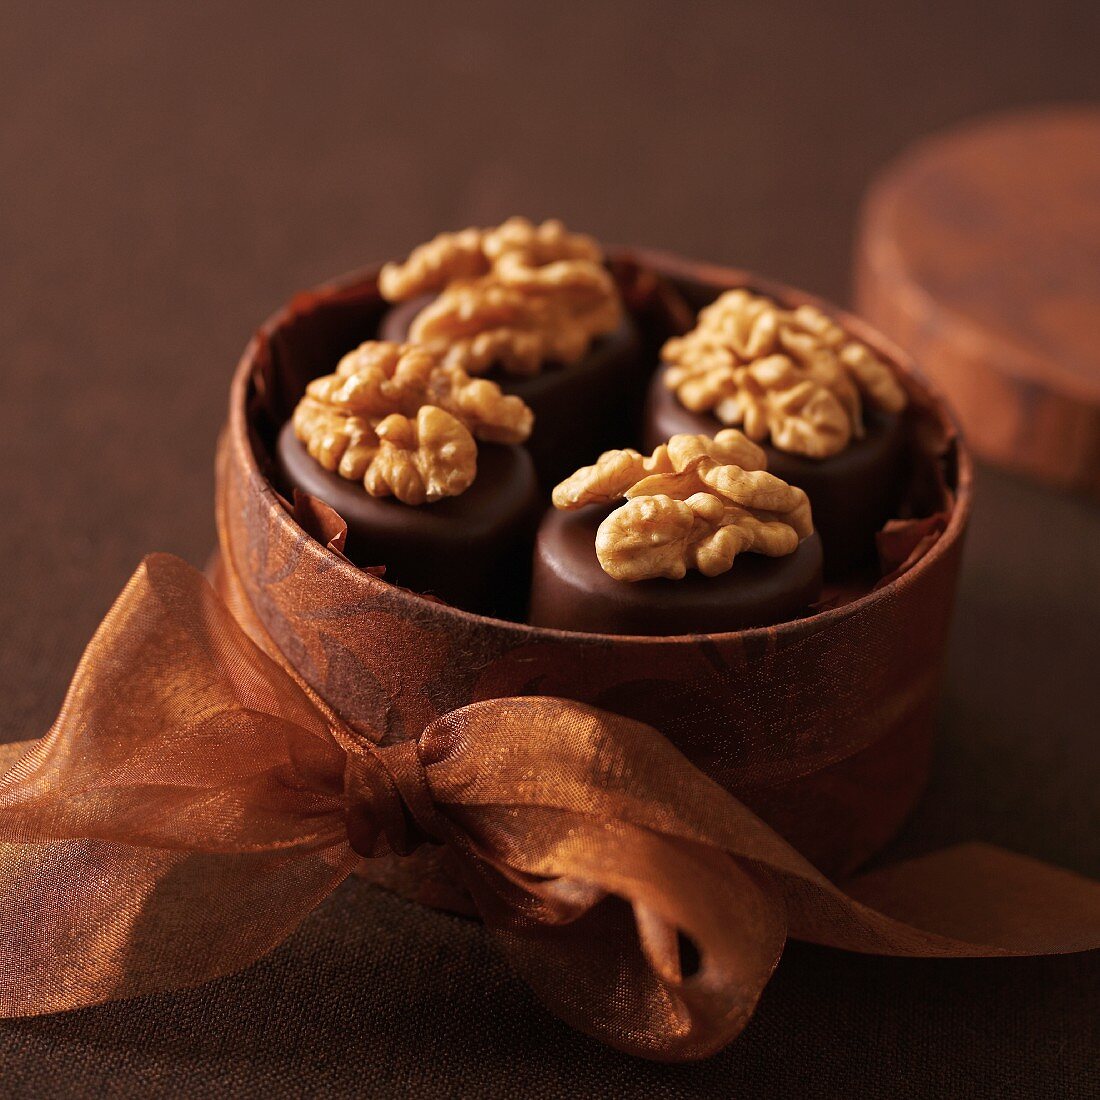 Walnut and marzipan pralines in a round gift box